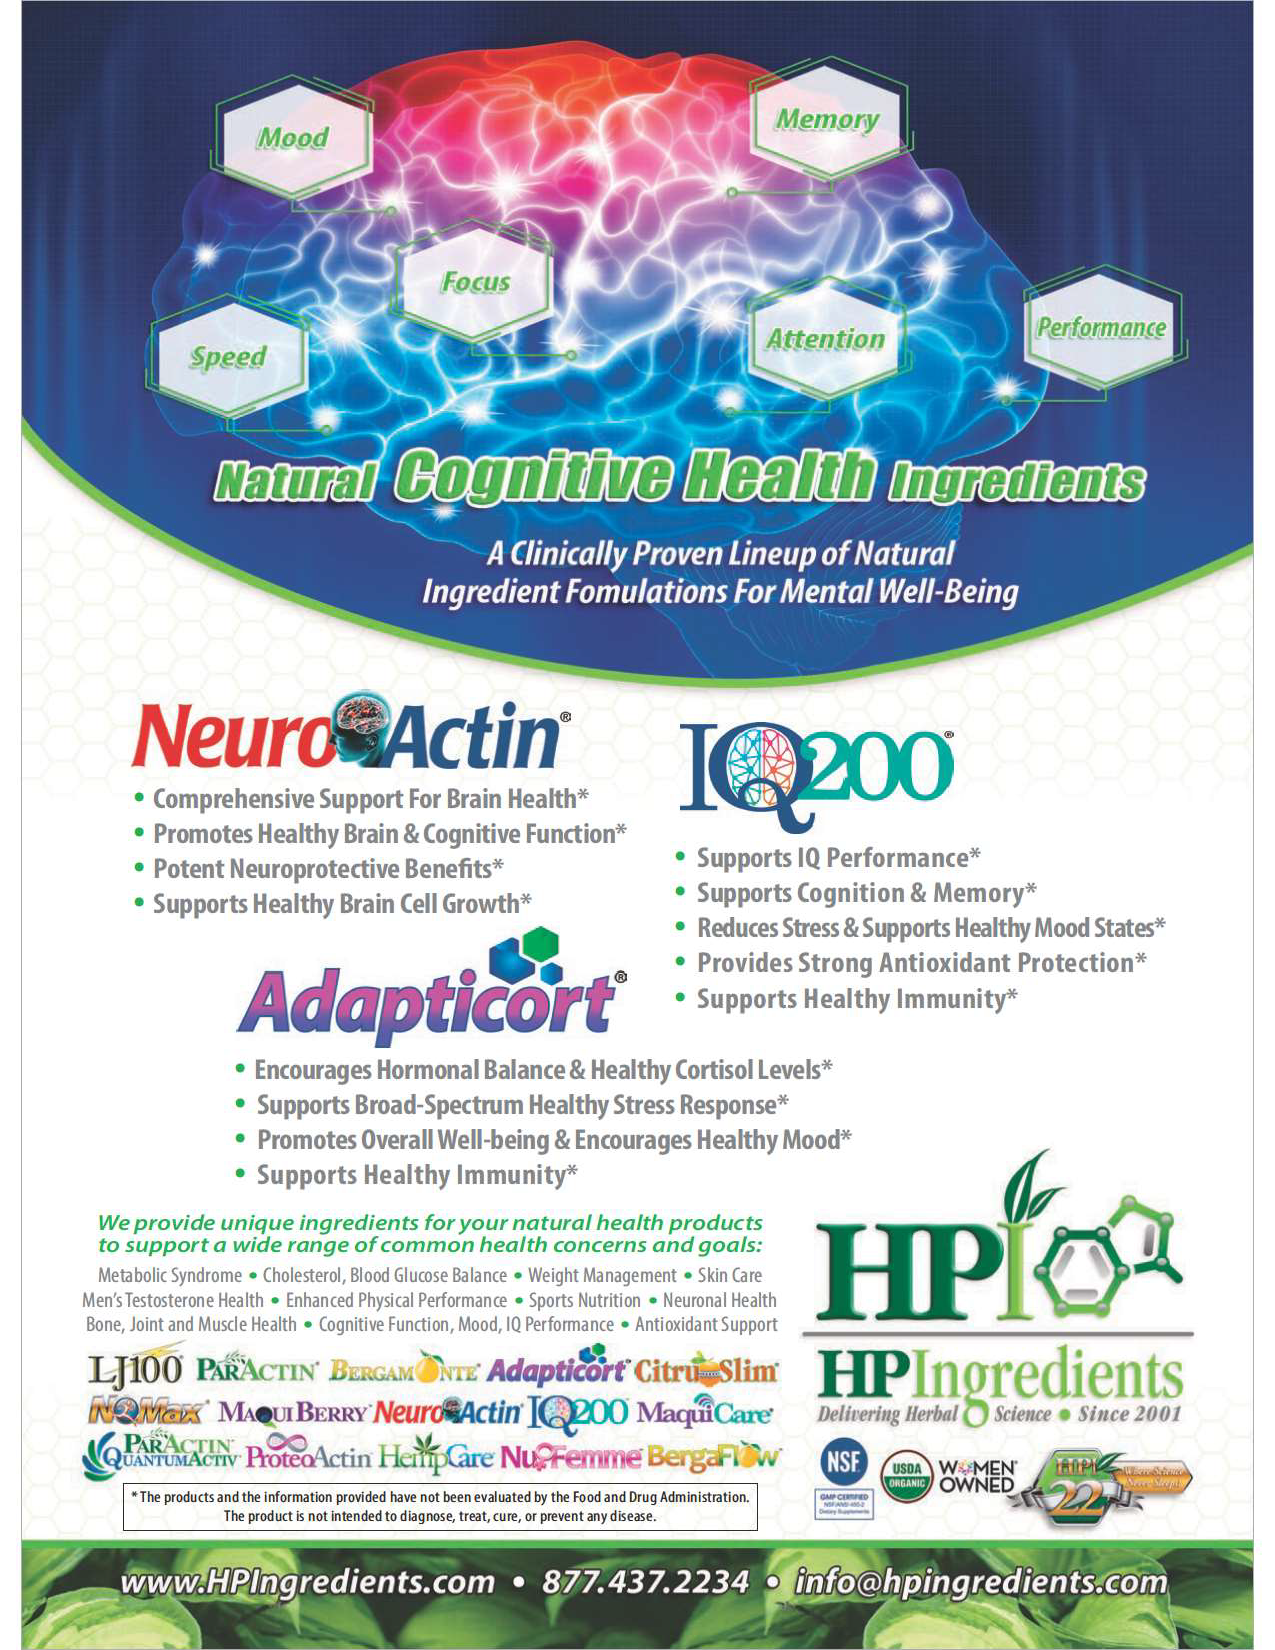 npi-pdg-cognitivehealth-0923-hpi-2-page_page_1